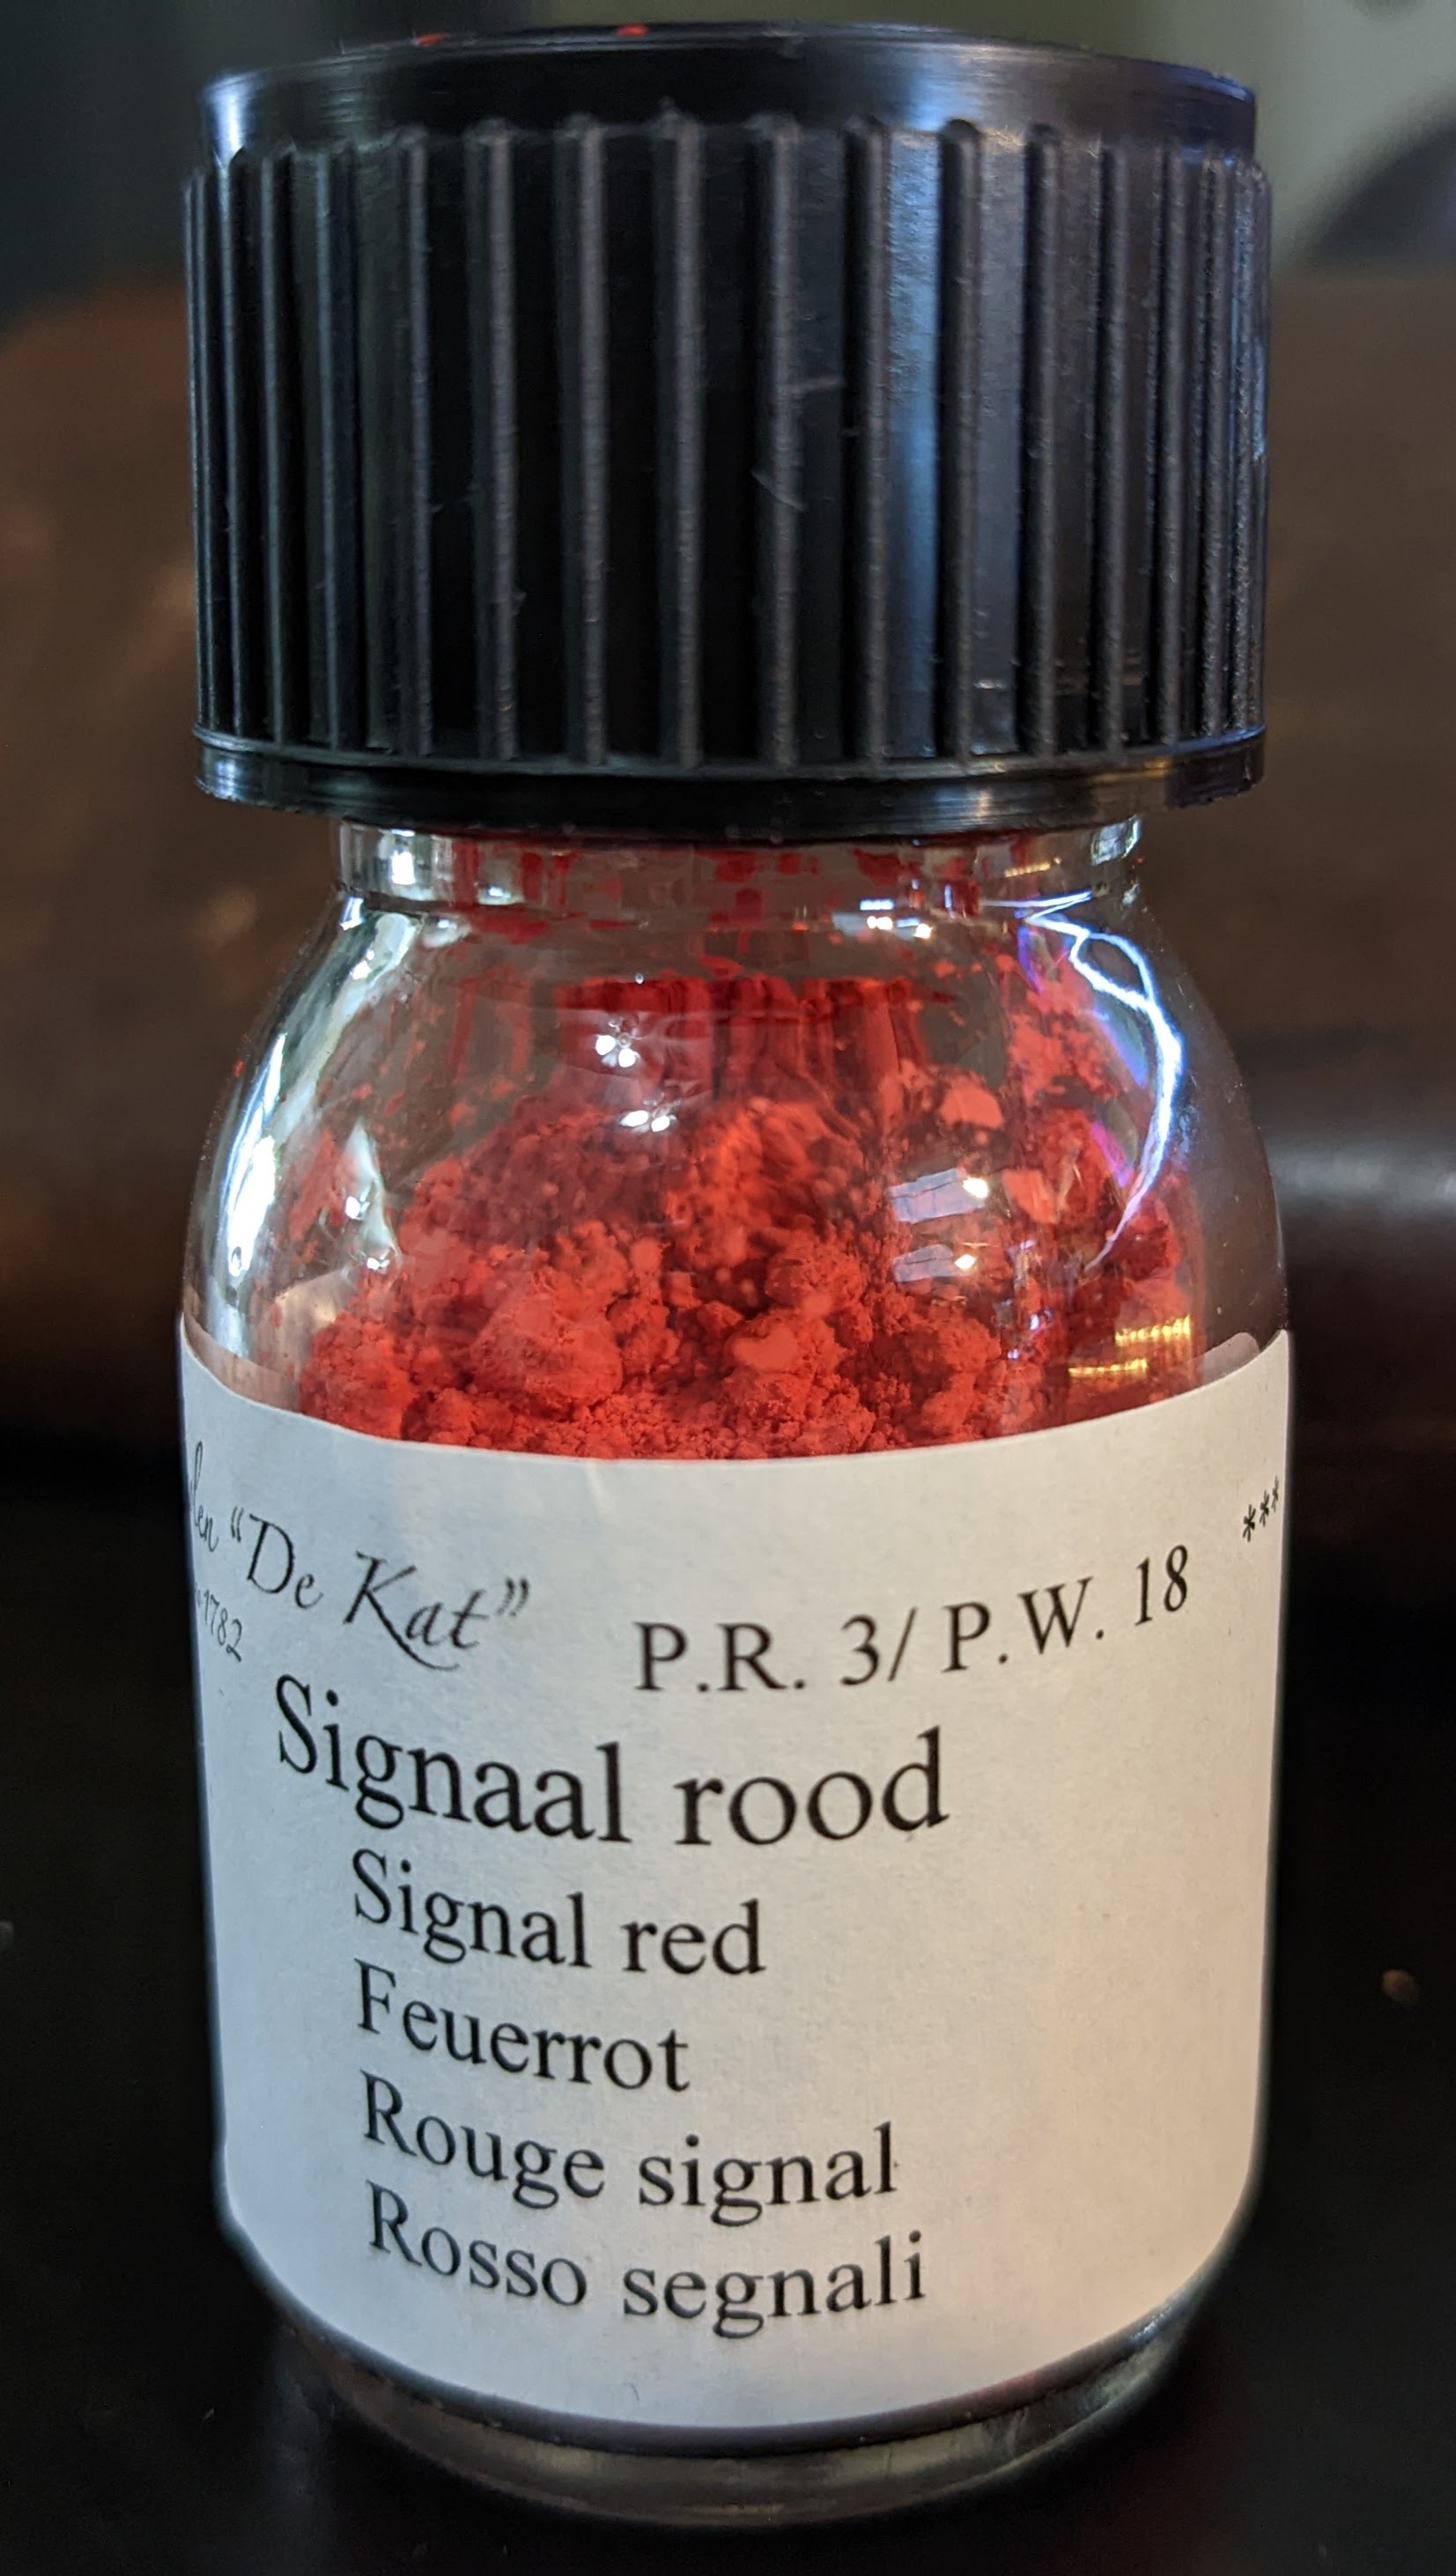 a small plastic jar of red pigment, says 'Signal rood'